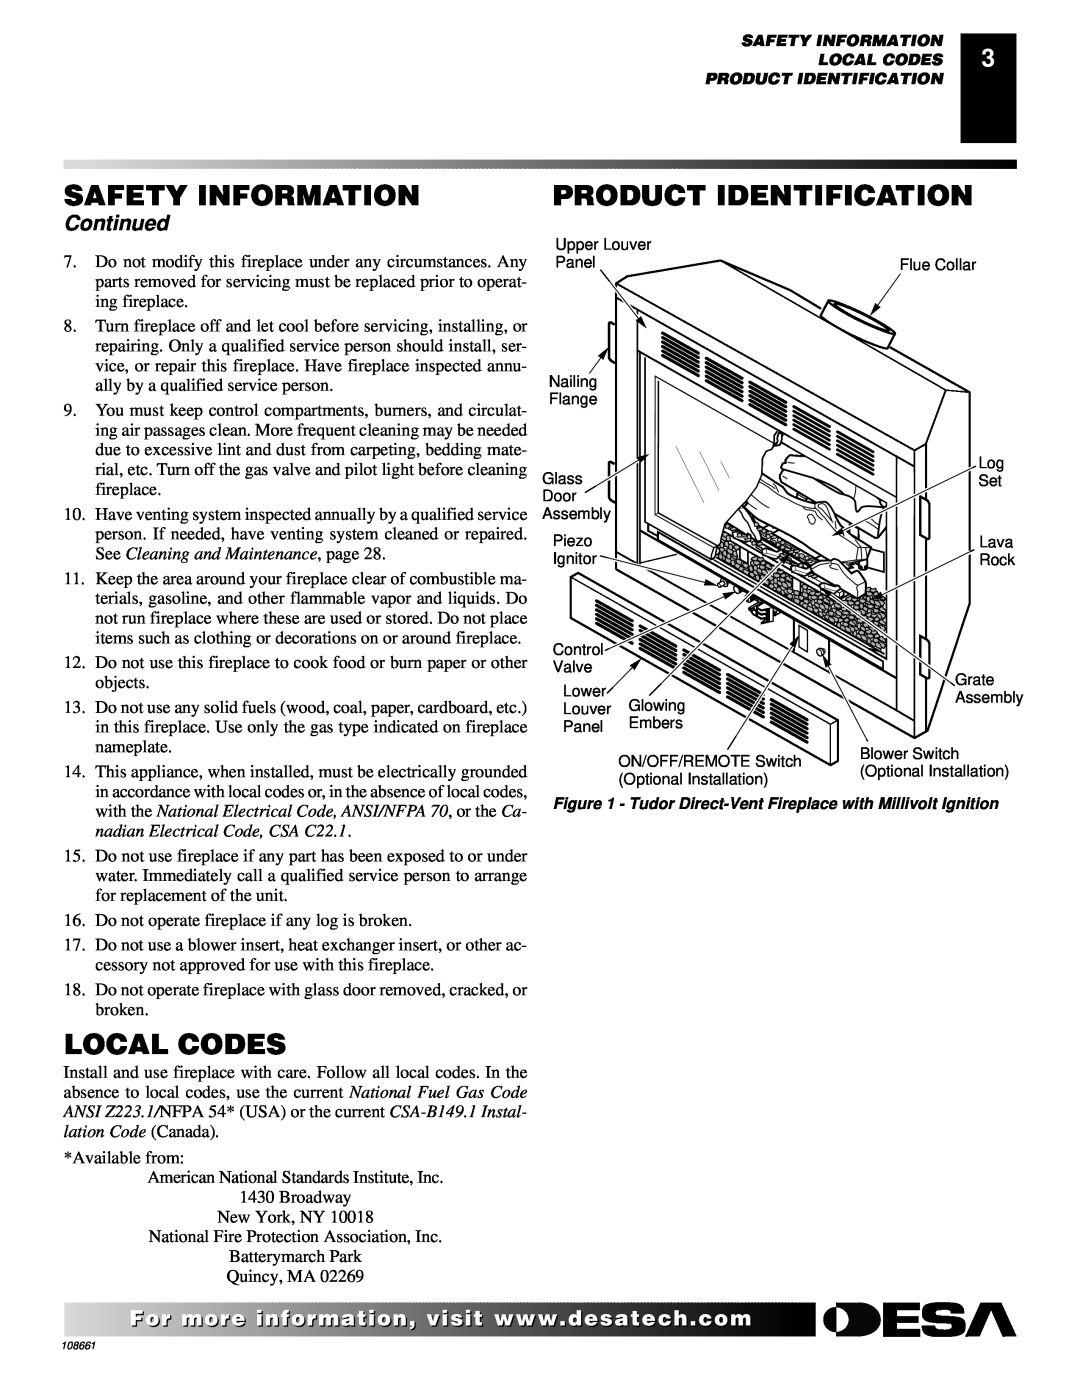 Desa T32N, T36N, T32P, T36P installation manual Product Identification, Local Codes, Continued, Safety Information 